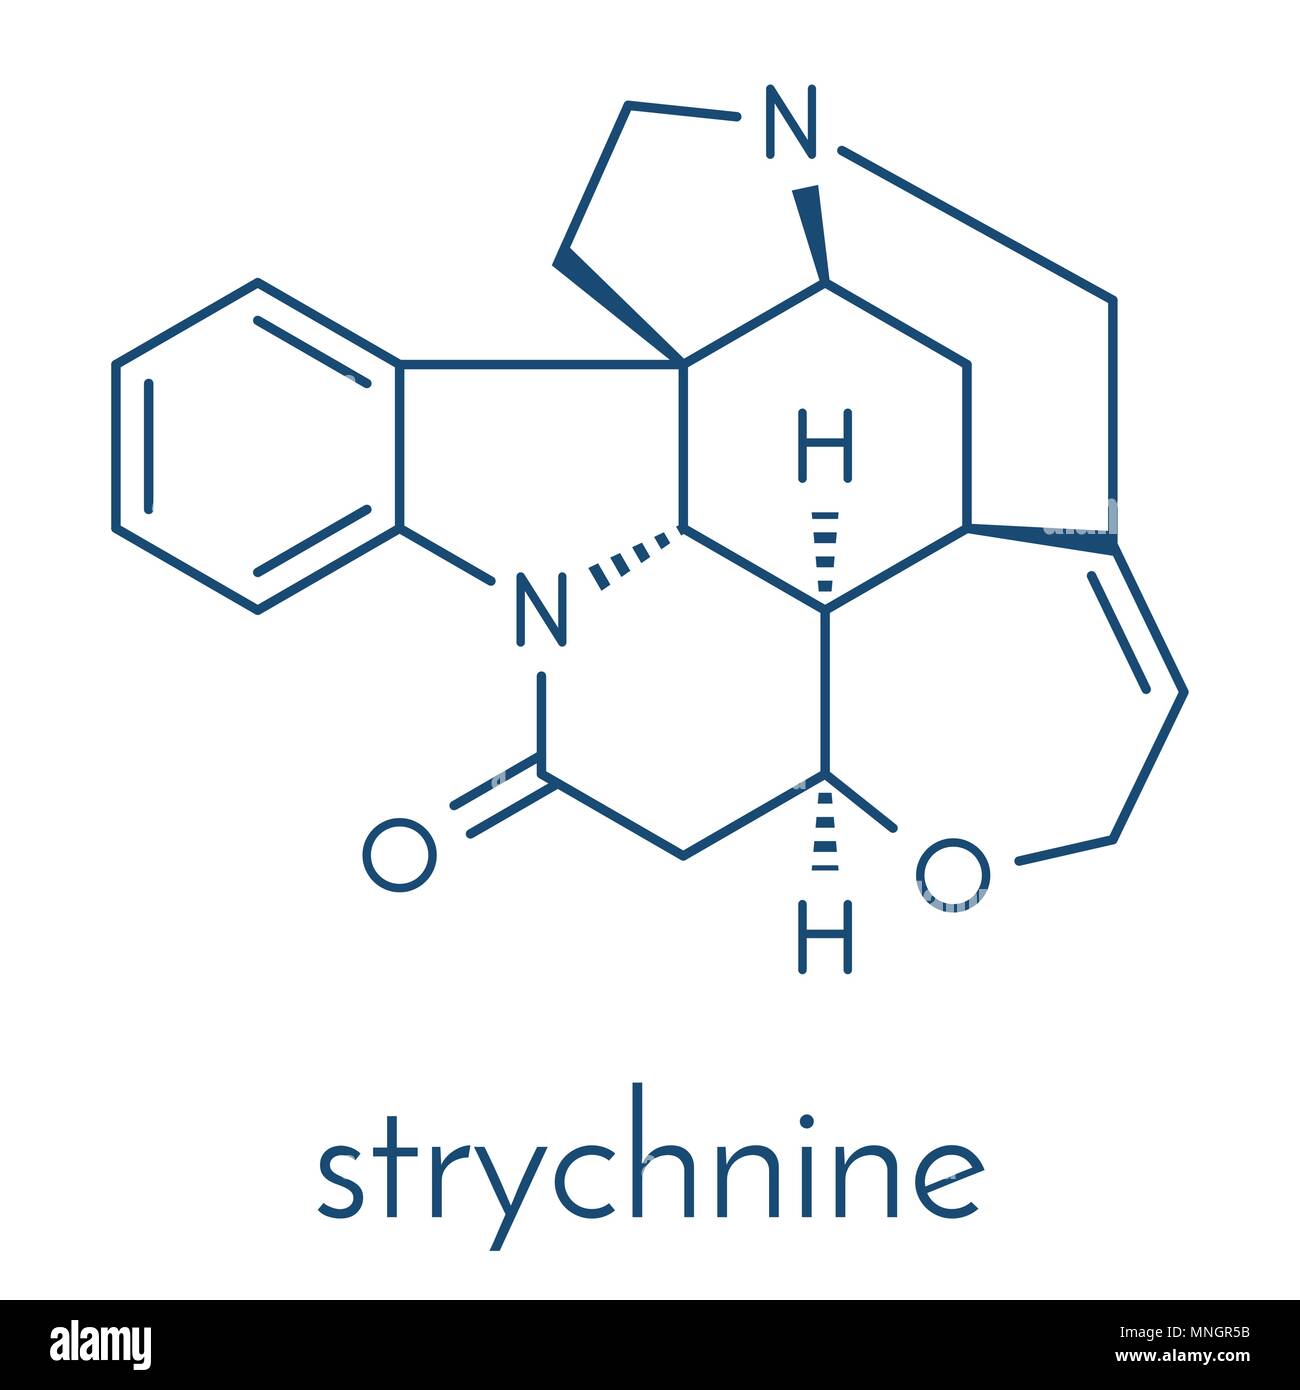 Strychnine poisonous alkaloid molecule. Isolated from Strychnos nux-vomica tree. Skeletal formula. Stock Vector